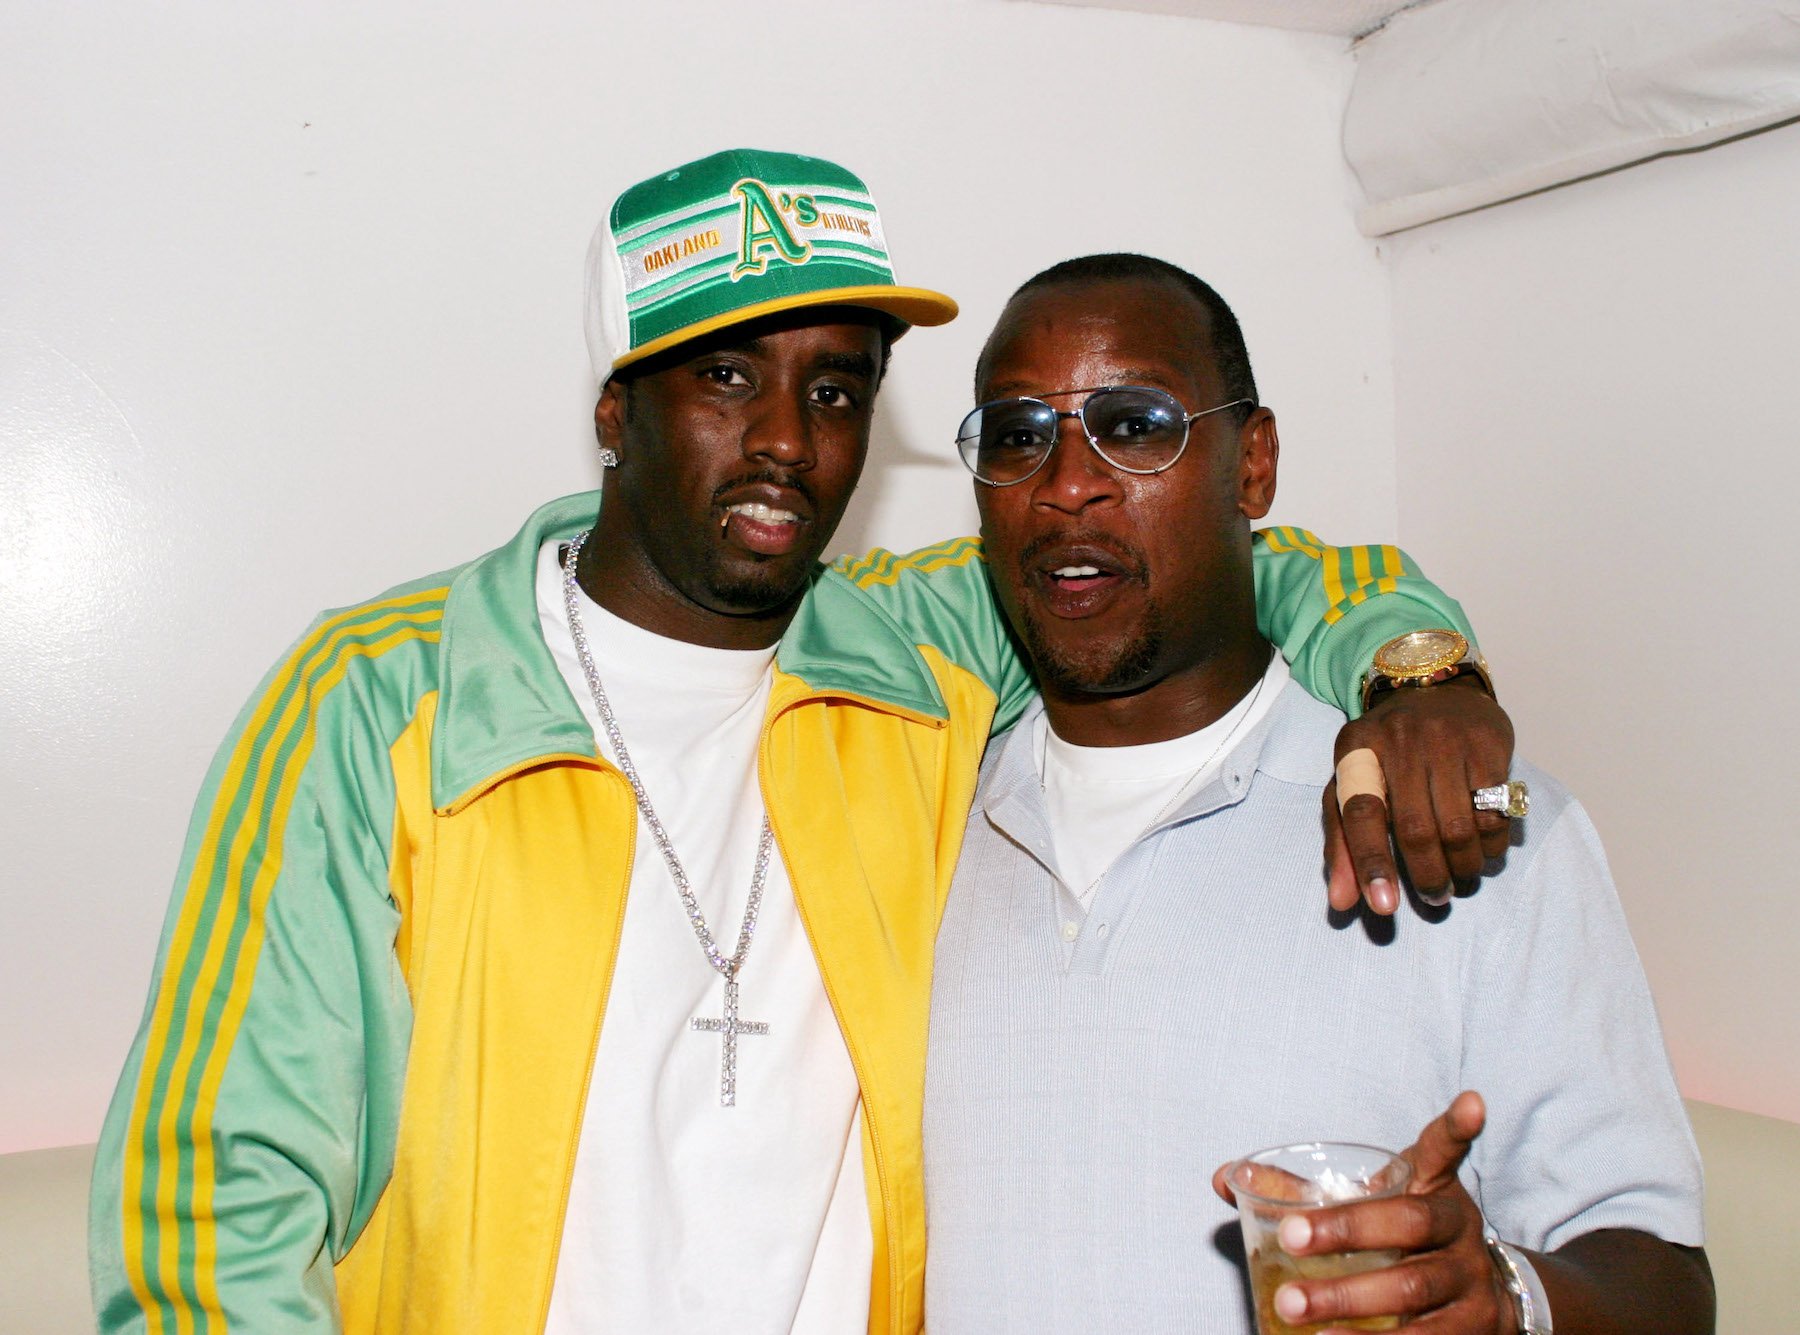 Sean "P. Diddy" Combs and former Uptown Records CEO Andre Harrell posing for a photo together